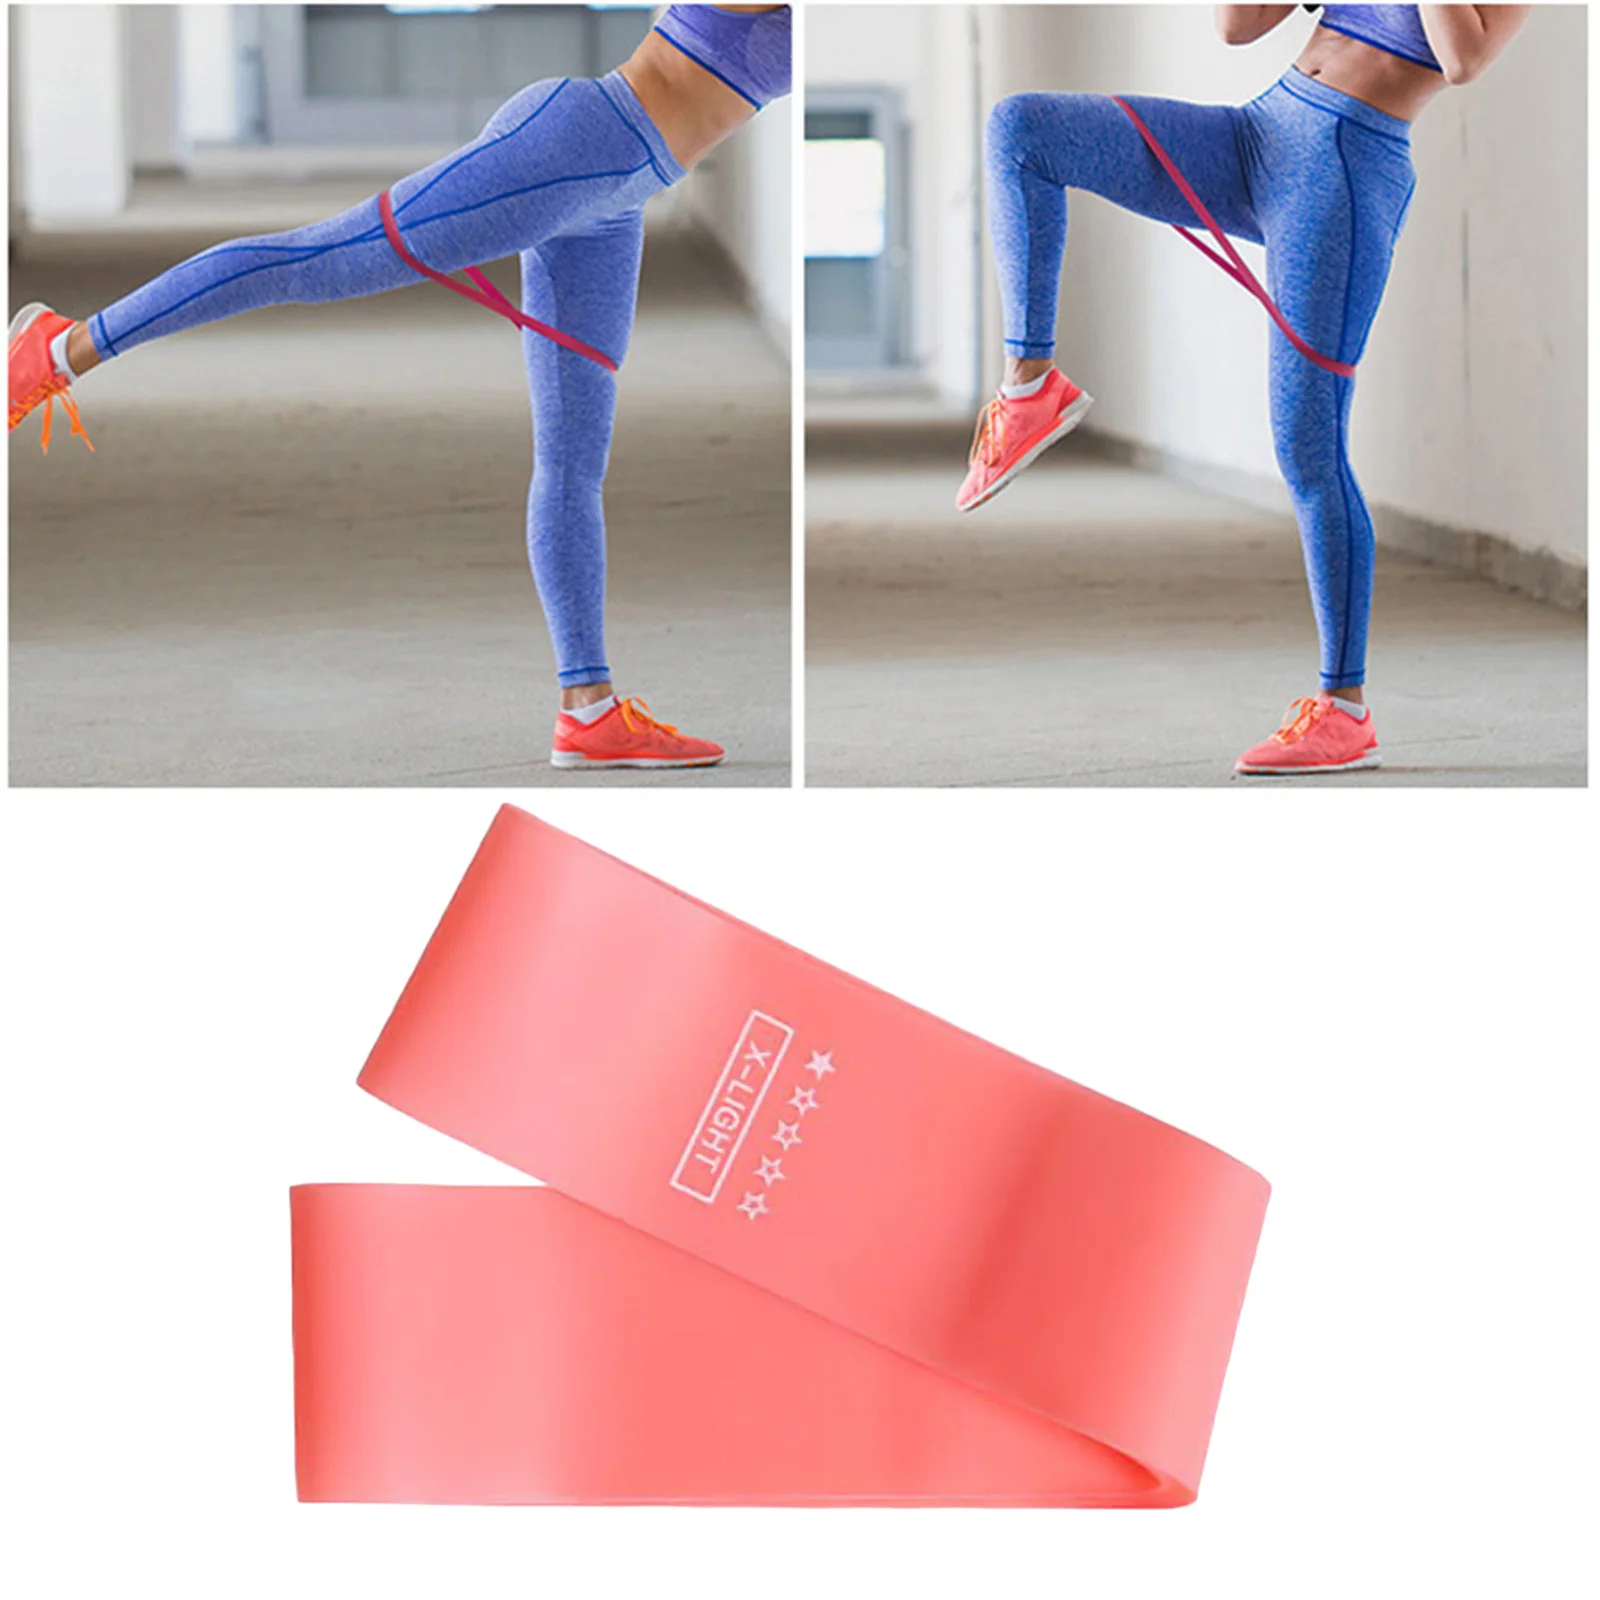 Fitness Gym Resistance Band for Upper & Lower Body Core Exercise At-Home Workouts Rehab Legs and Butt Exercise